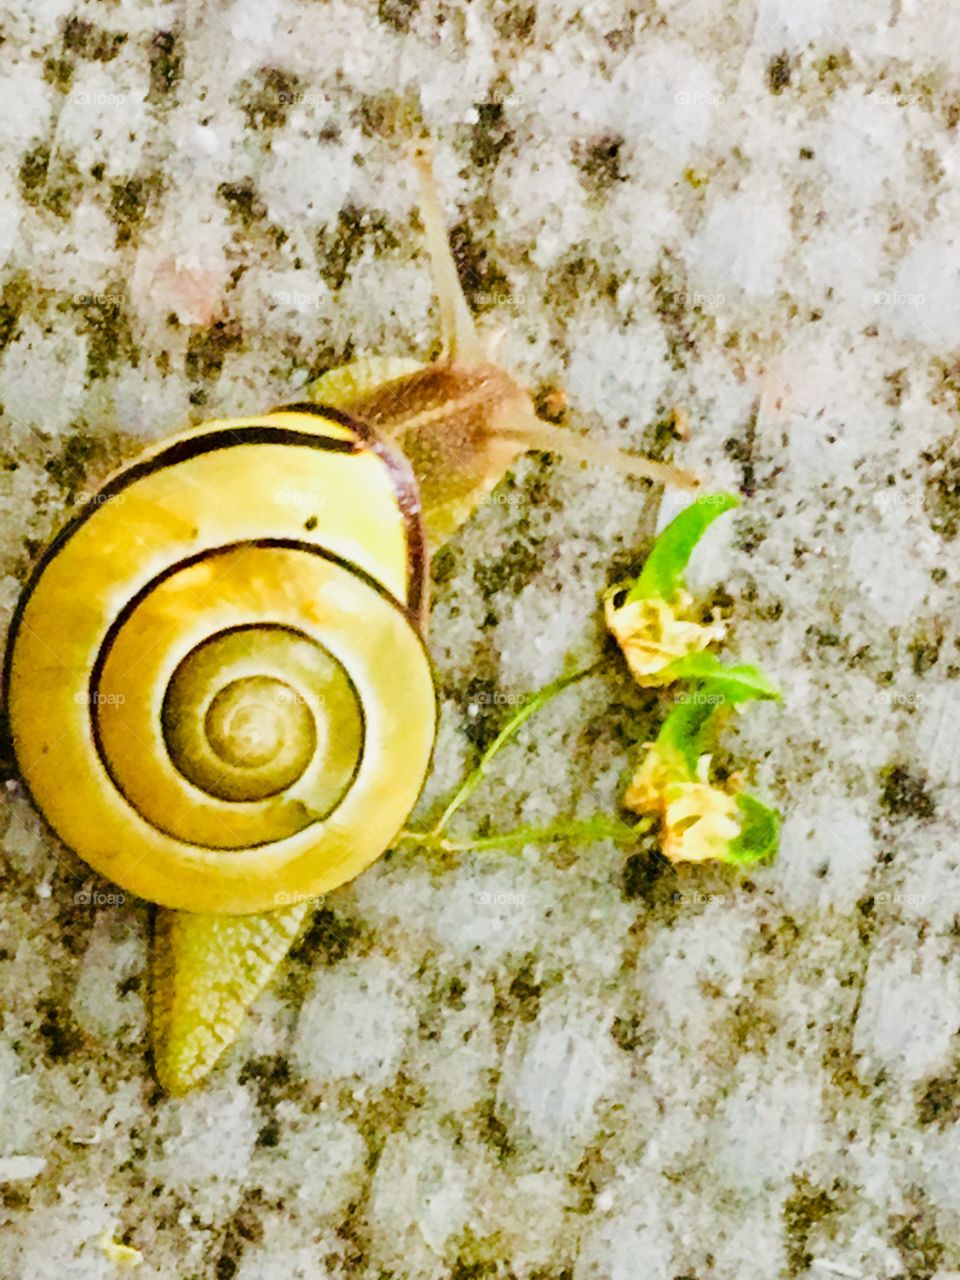 Snail on Balcony-May 29 2017- Montreal, Quebec, Canada 